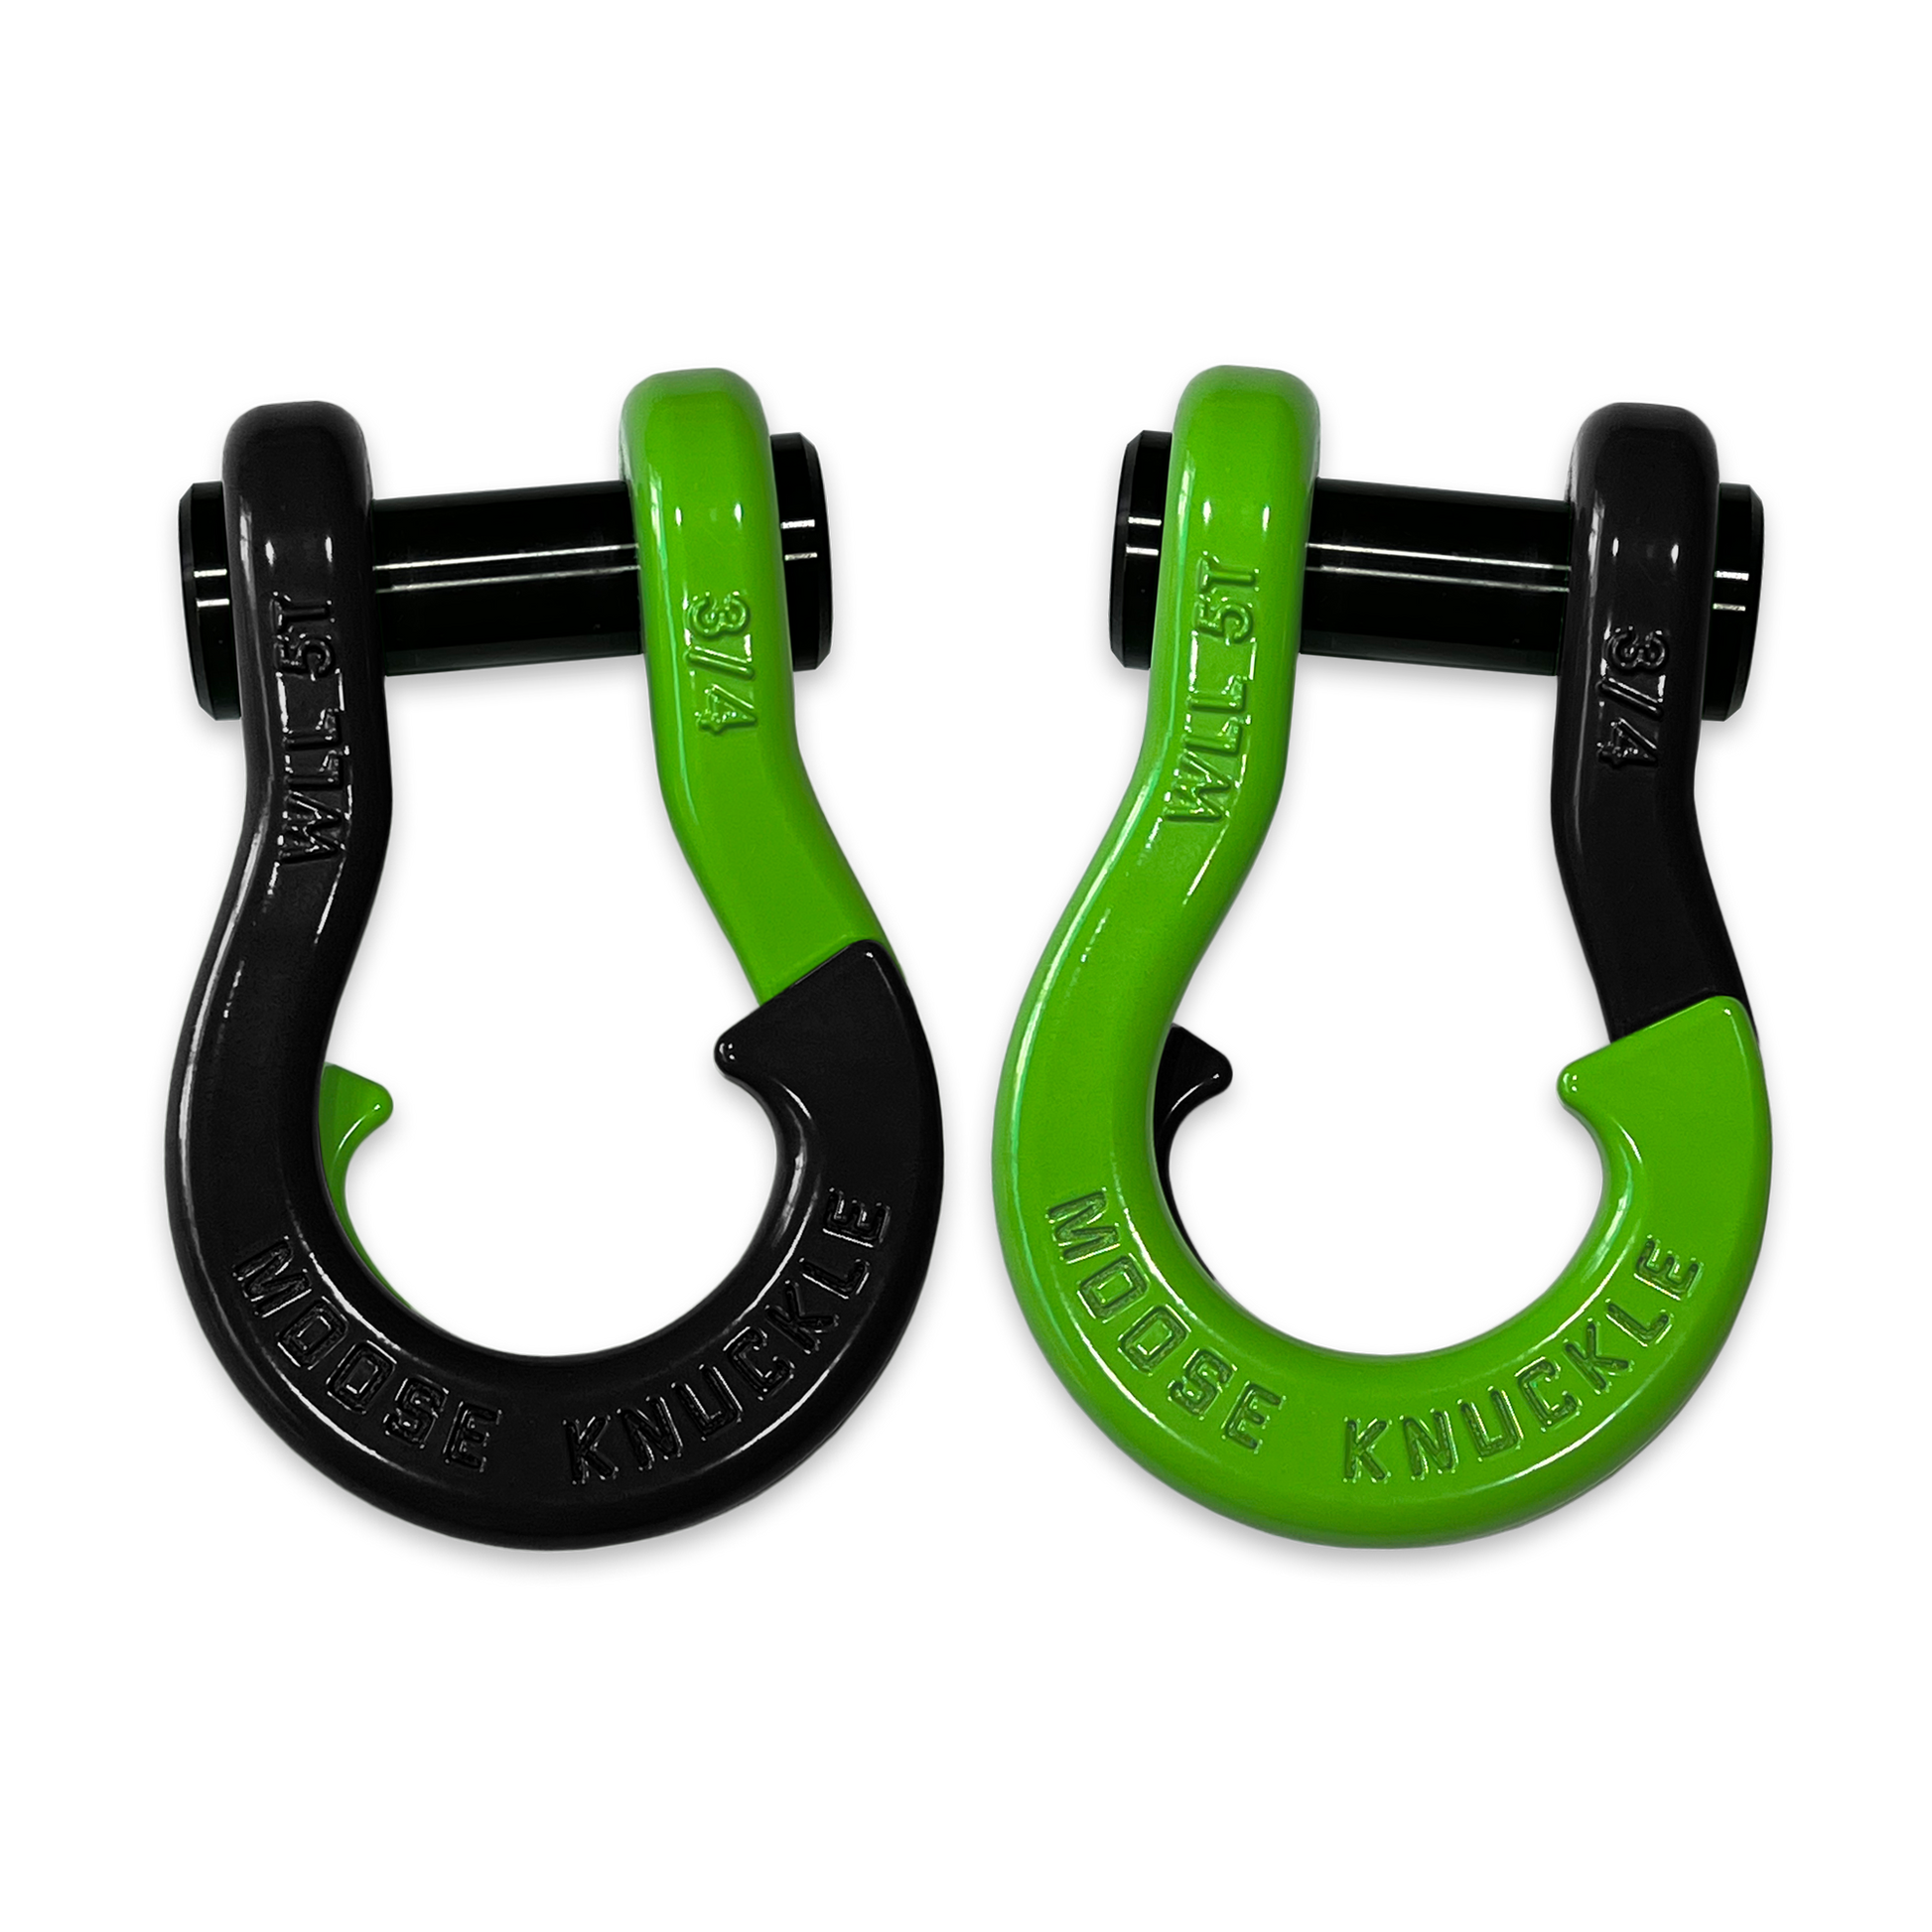 Moose Knuckle's Jowl Recovery Split Shackle 3/4 in Black Hole and Sublime Green Combo